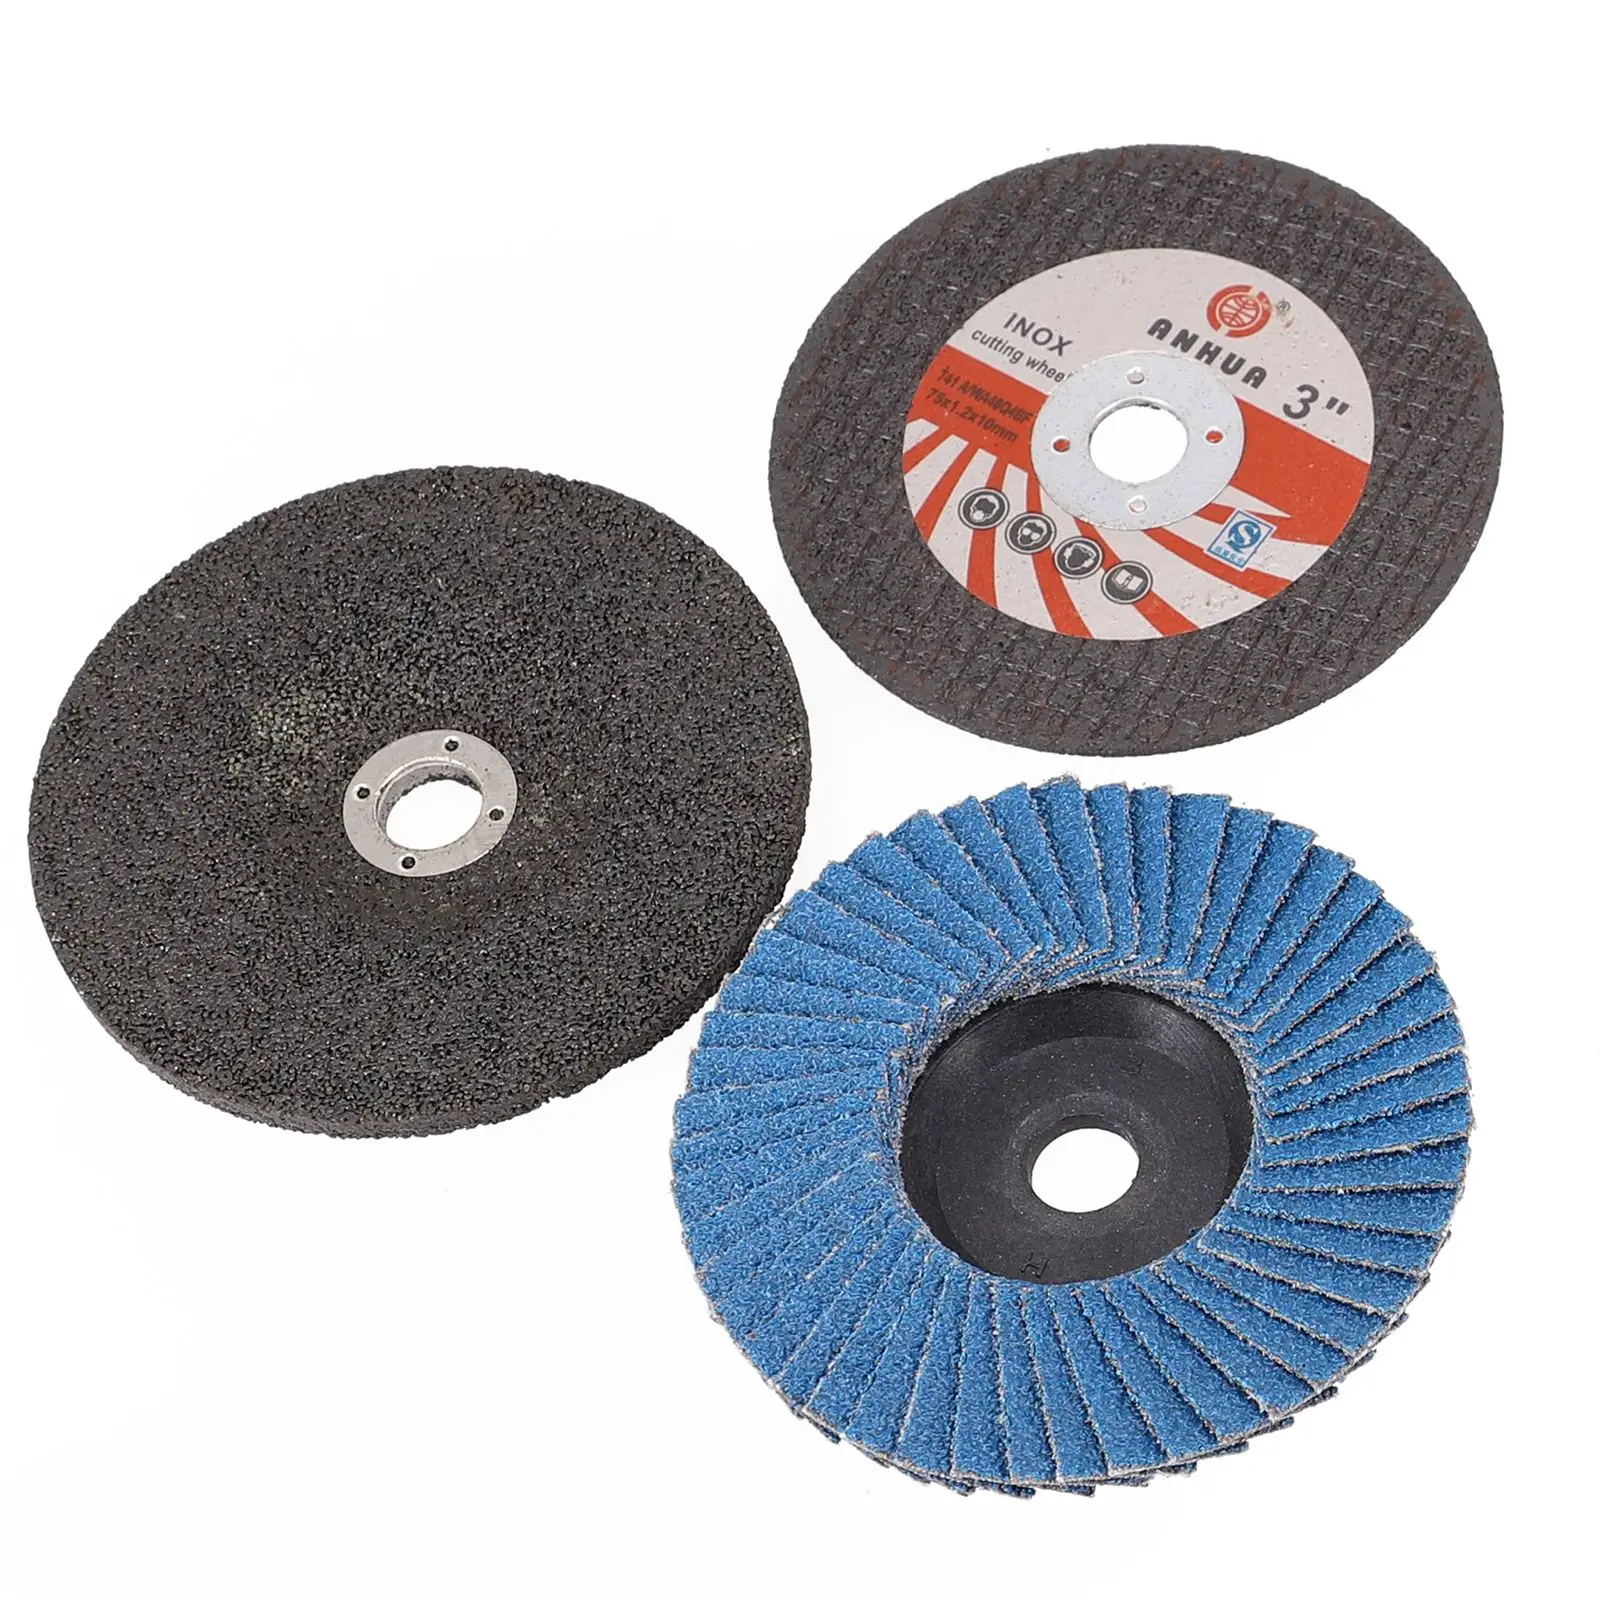 Brand New Cutting Disc Grinding Wheel Circular Saw Blade For Angle Grinder For Ceramic Tile Wood Polishing Disc angle grinder grinding disc diamond cutting saw blade wood cutting disc blade grinding wood woodwork marble glass porcelain tile